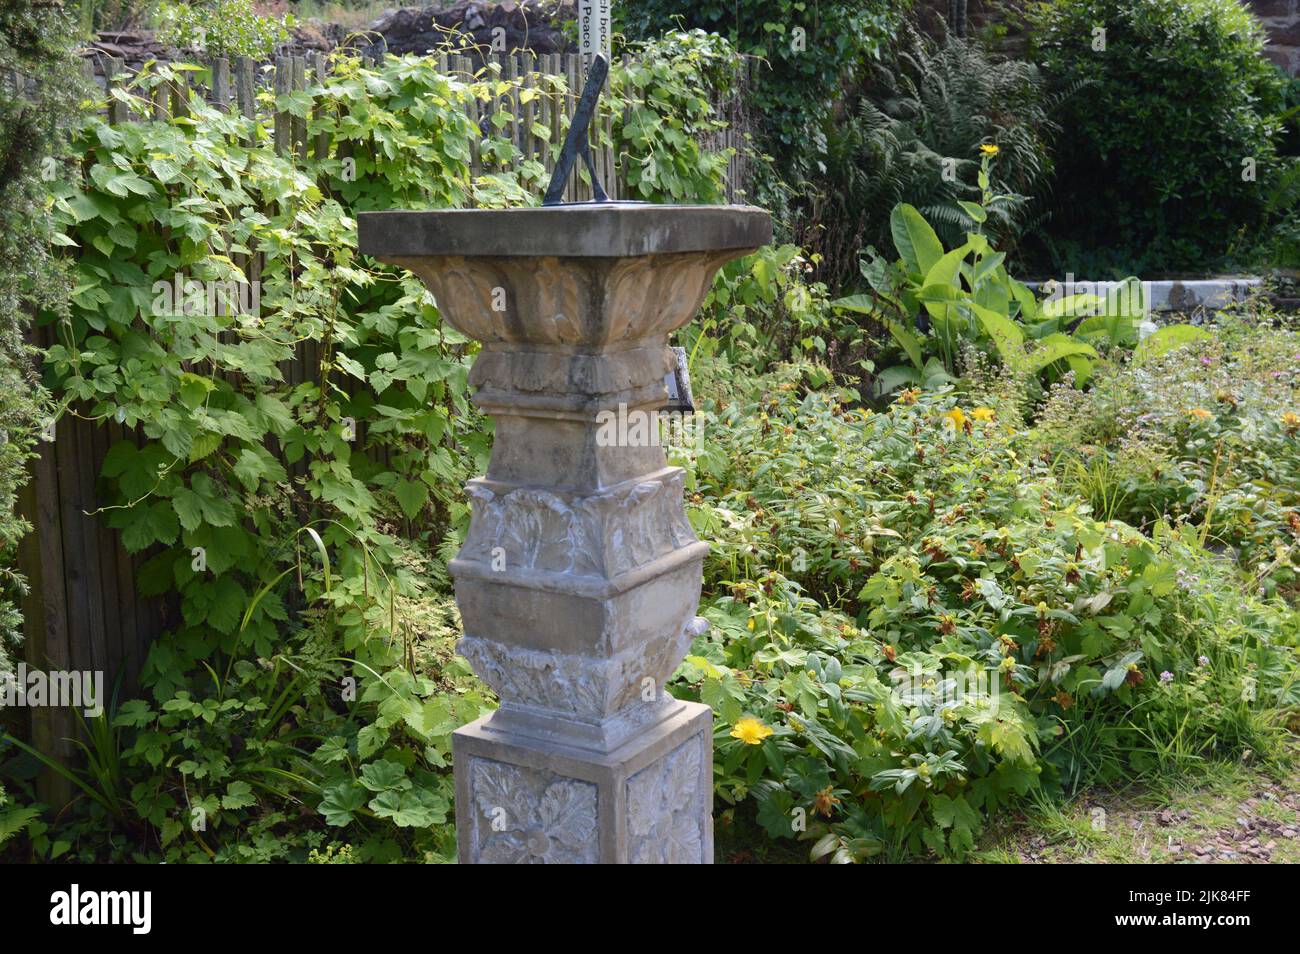 An ornate sundial pedestal carved by Hugh Millar in 18th century, in the garden of his cottage in Cromarty, Scotland Stock Photo